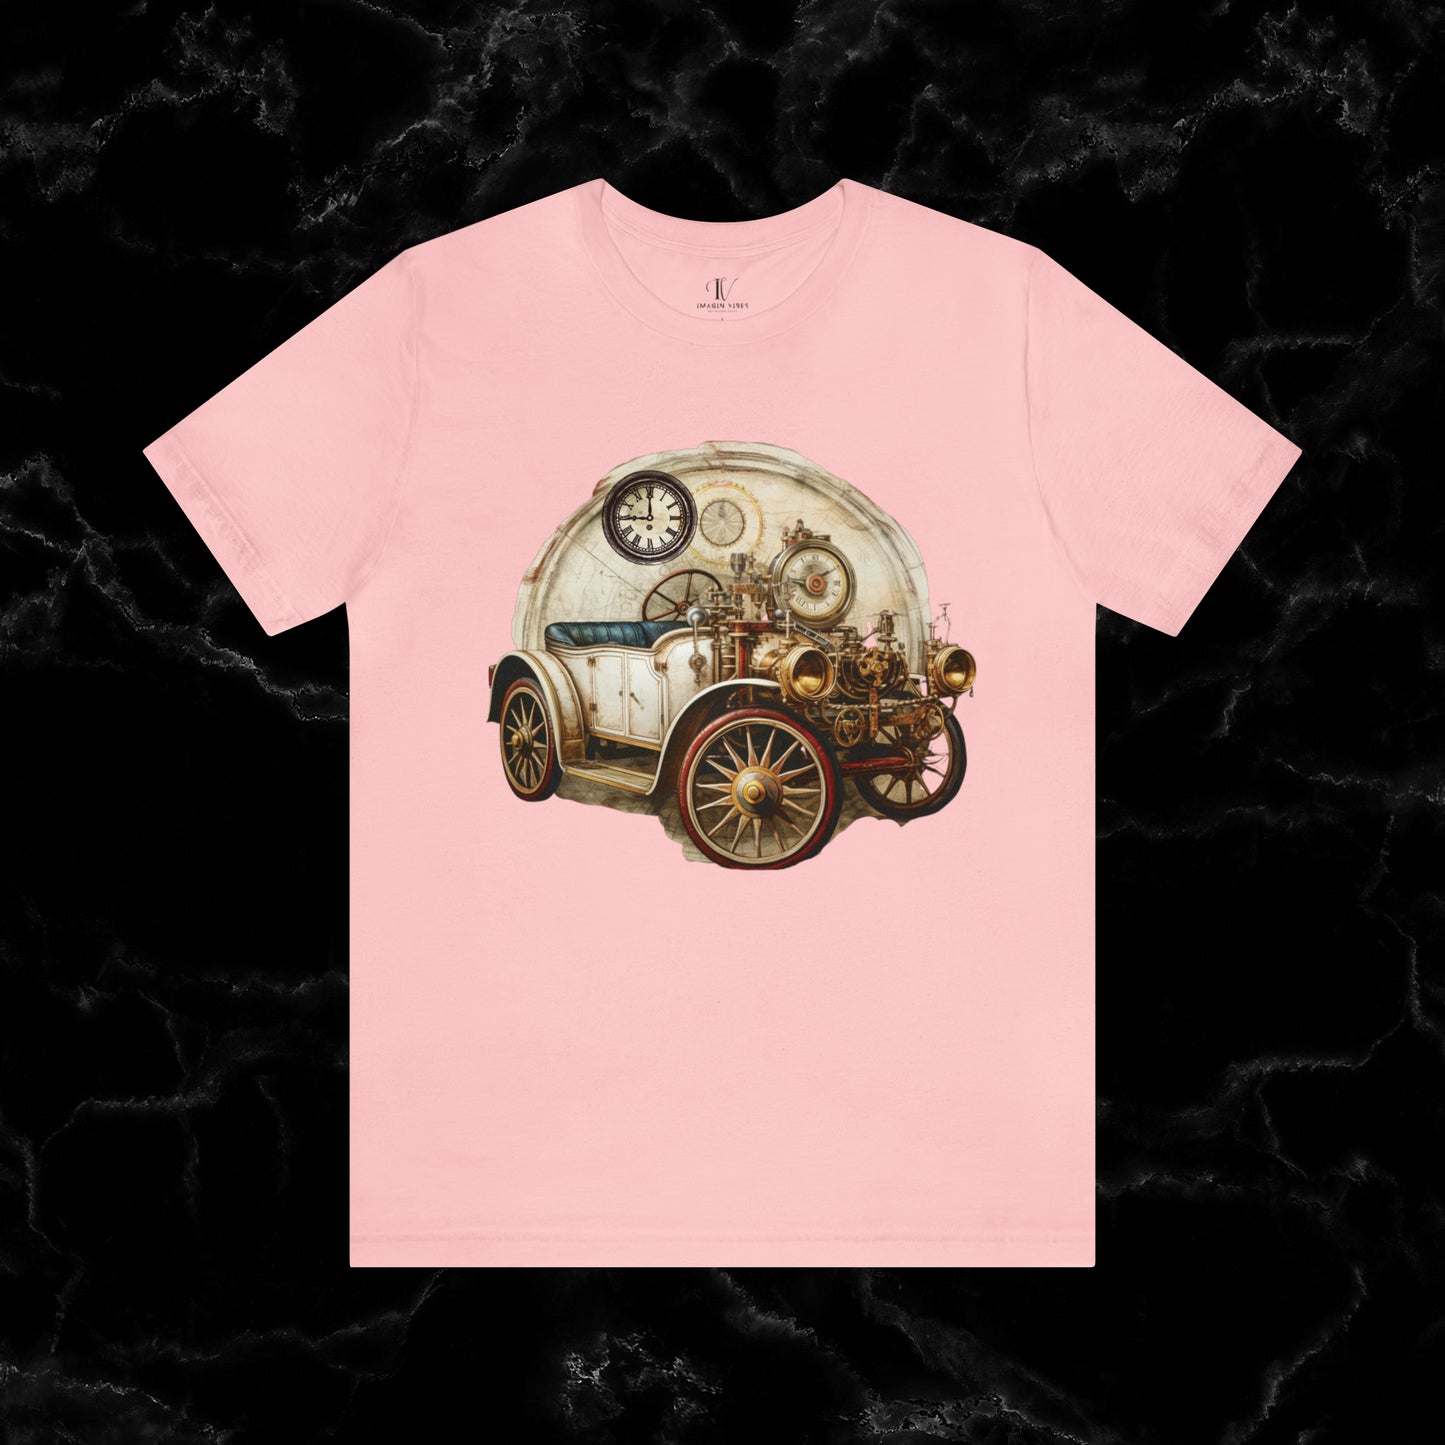 Ride in Style: Vintage Car Enthusiast T-Shirt with Classic Wheels and Timeless Appeal T-Shirt Pink S 